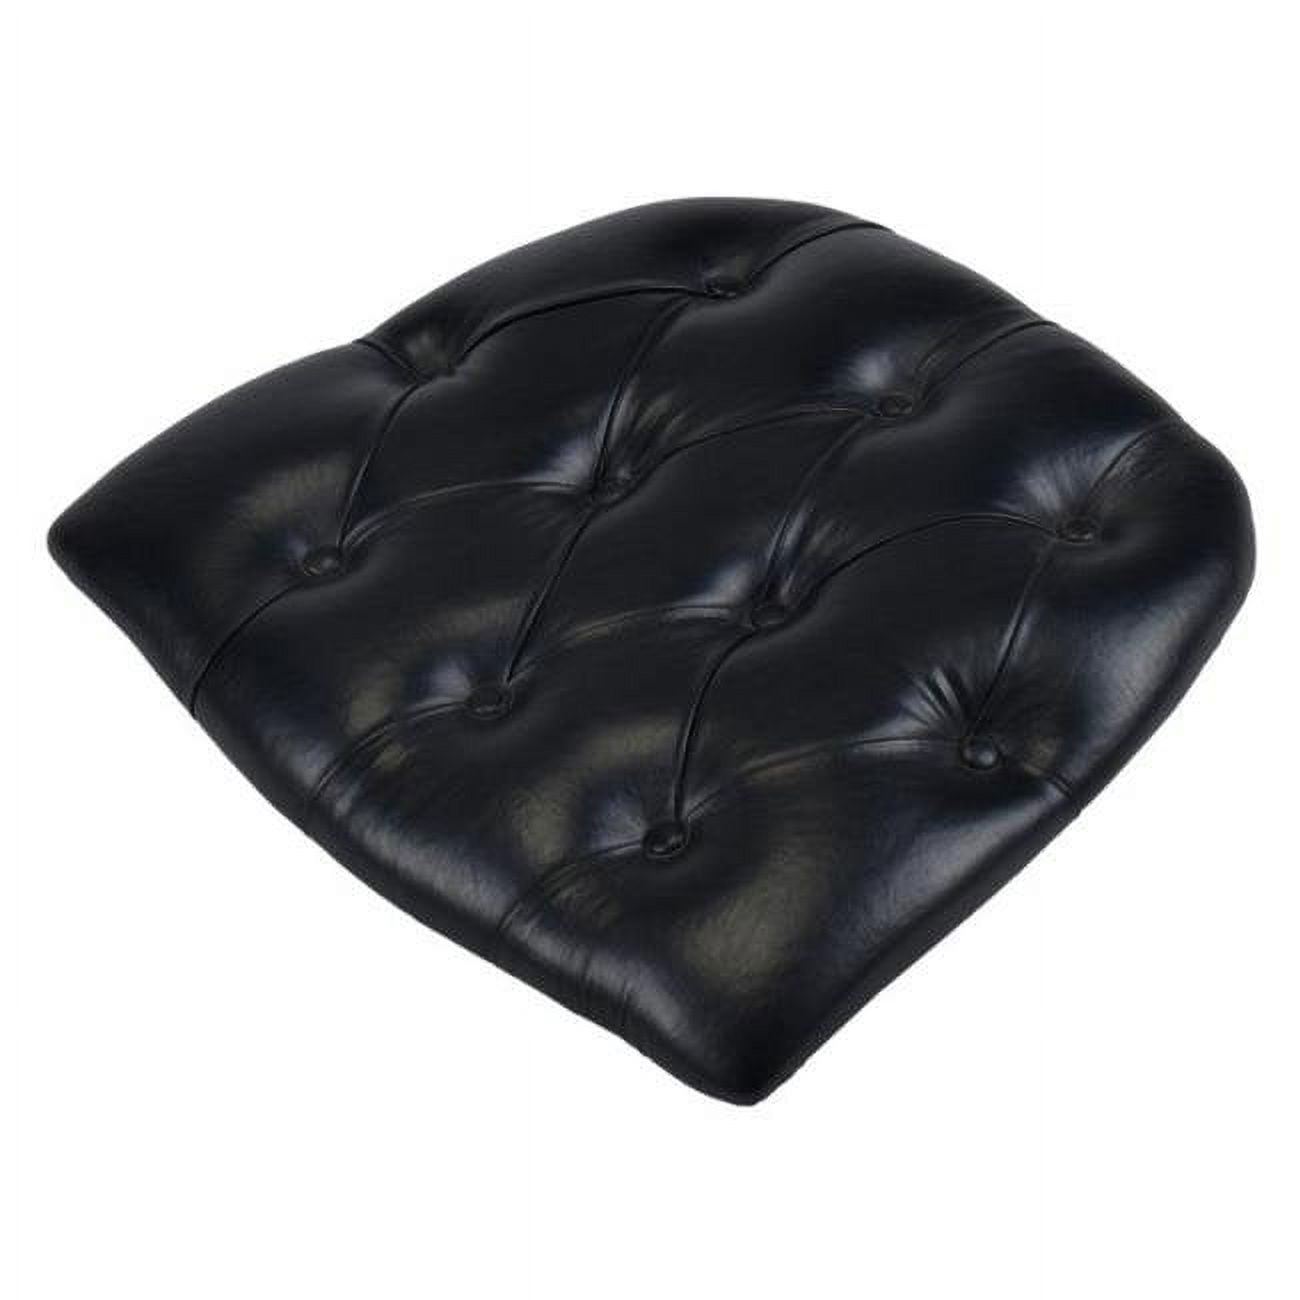 Cup-v-tufted-bk-web6 Indoor & Outdoor Black Tufted Vinyl Cushions, Set Of 6 - 2 X 16 X 16 In.